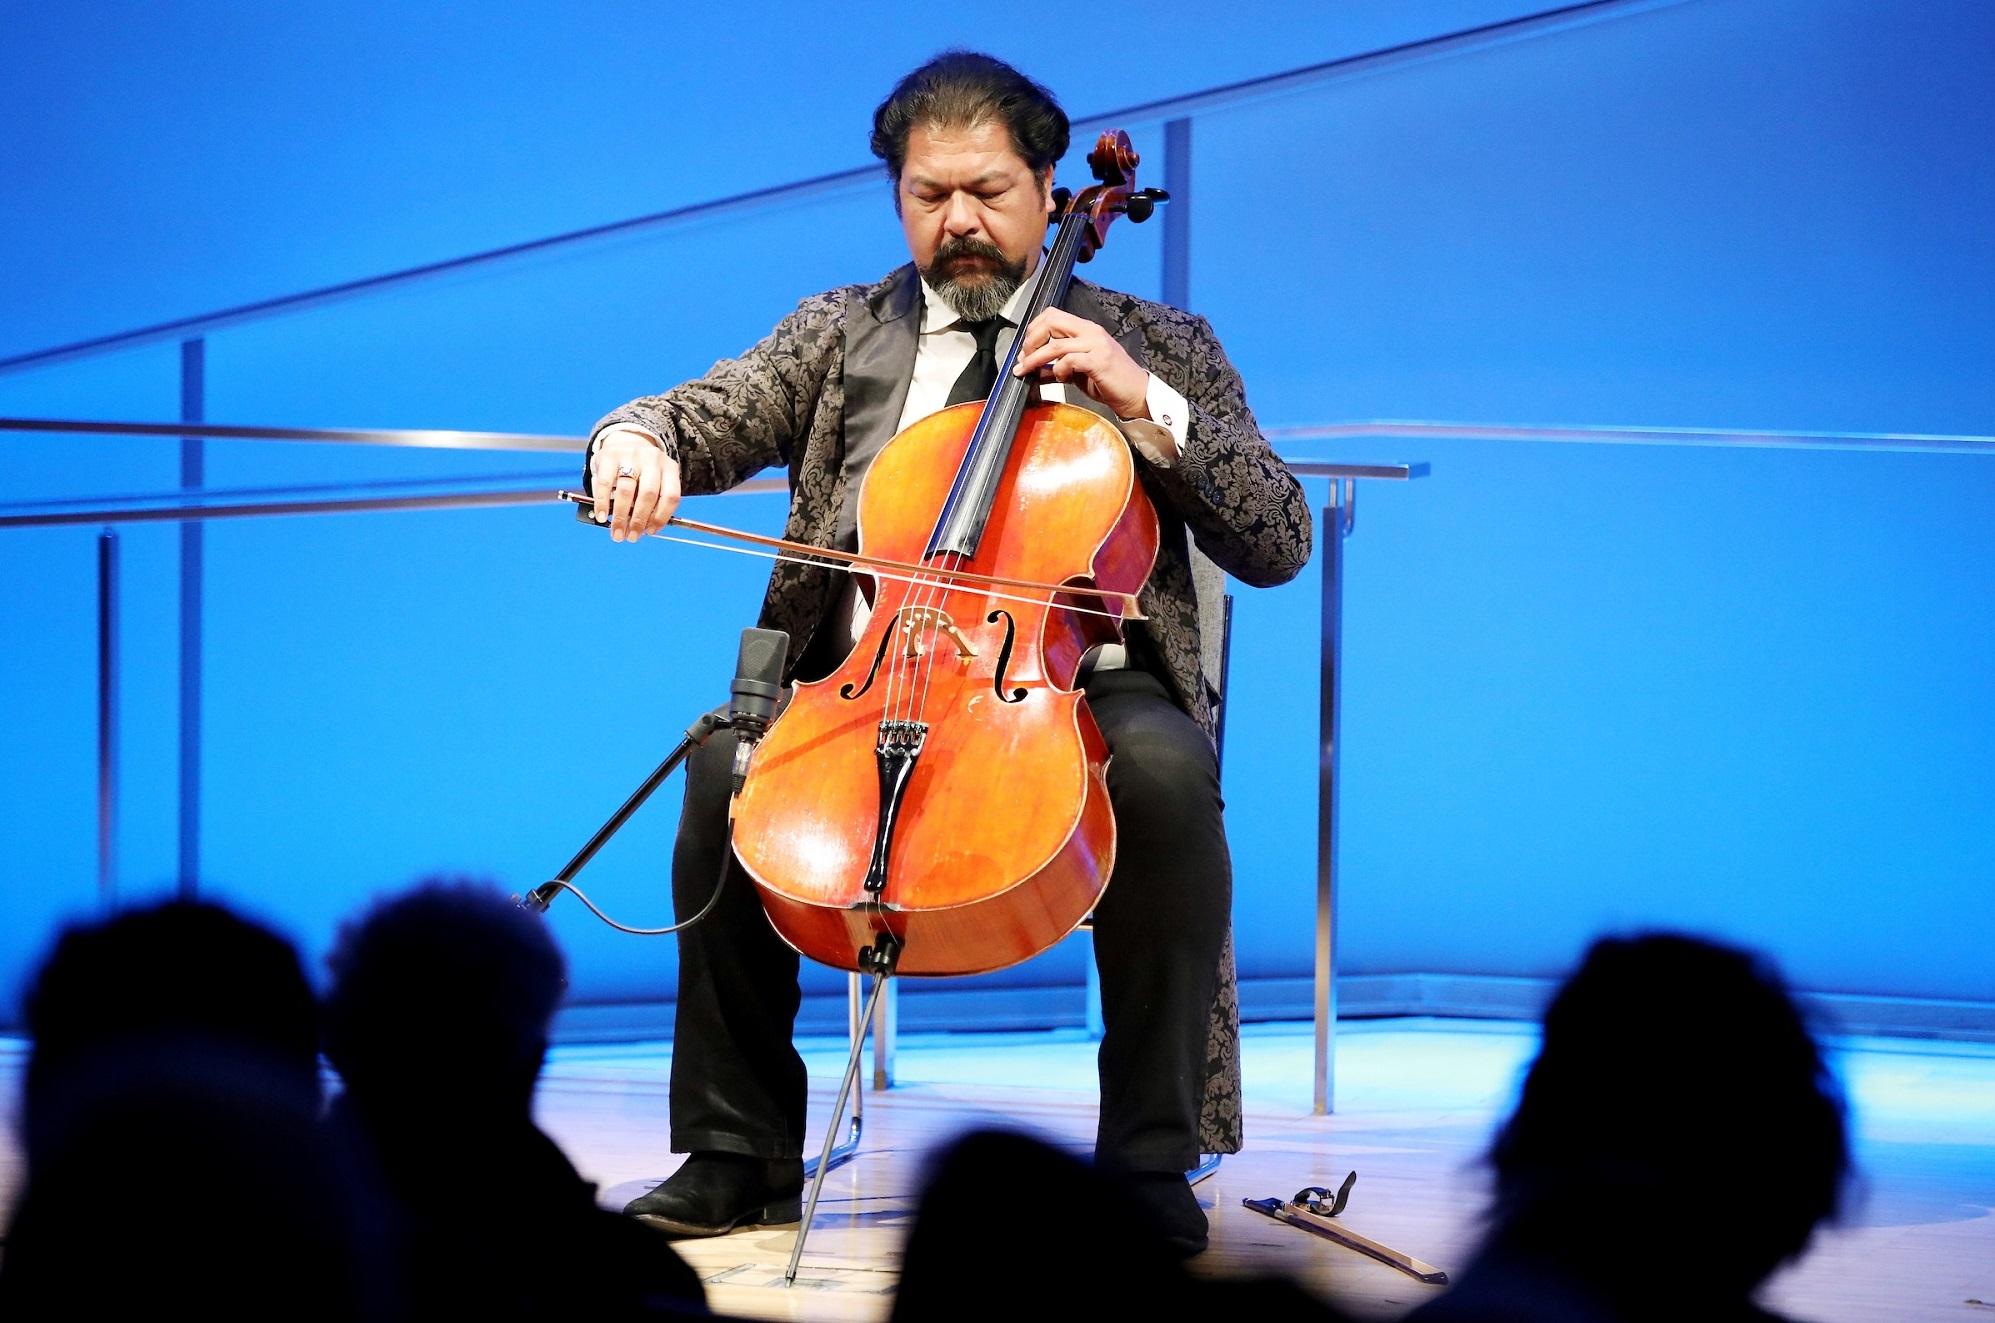 Cellist Karim Wasfi performs while seated onstage at the Museum auditorium. His eyes are closed as if he’s concentrating. His right hand grasps the bow as his left hand moves along the strings. His bright orange-brown cello contrasts with the blue lights of the stage. The silhouettes of several audience members are visible in the foreground.